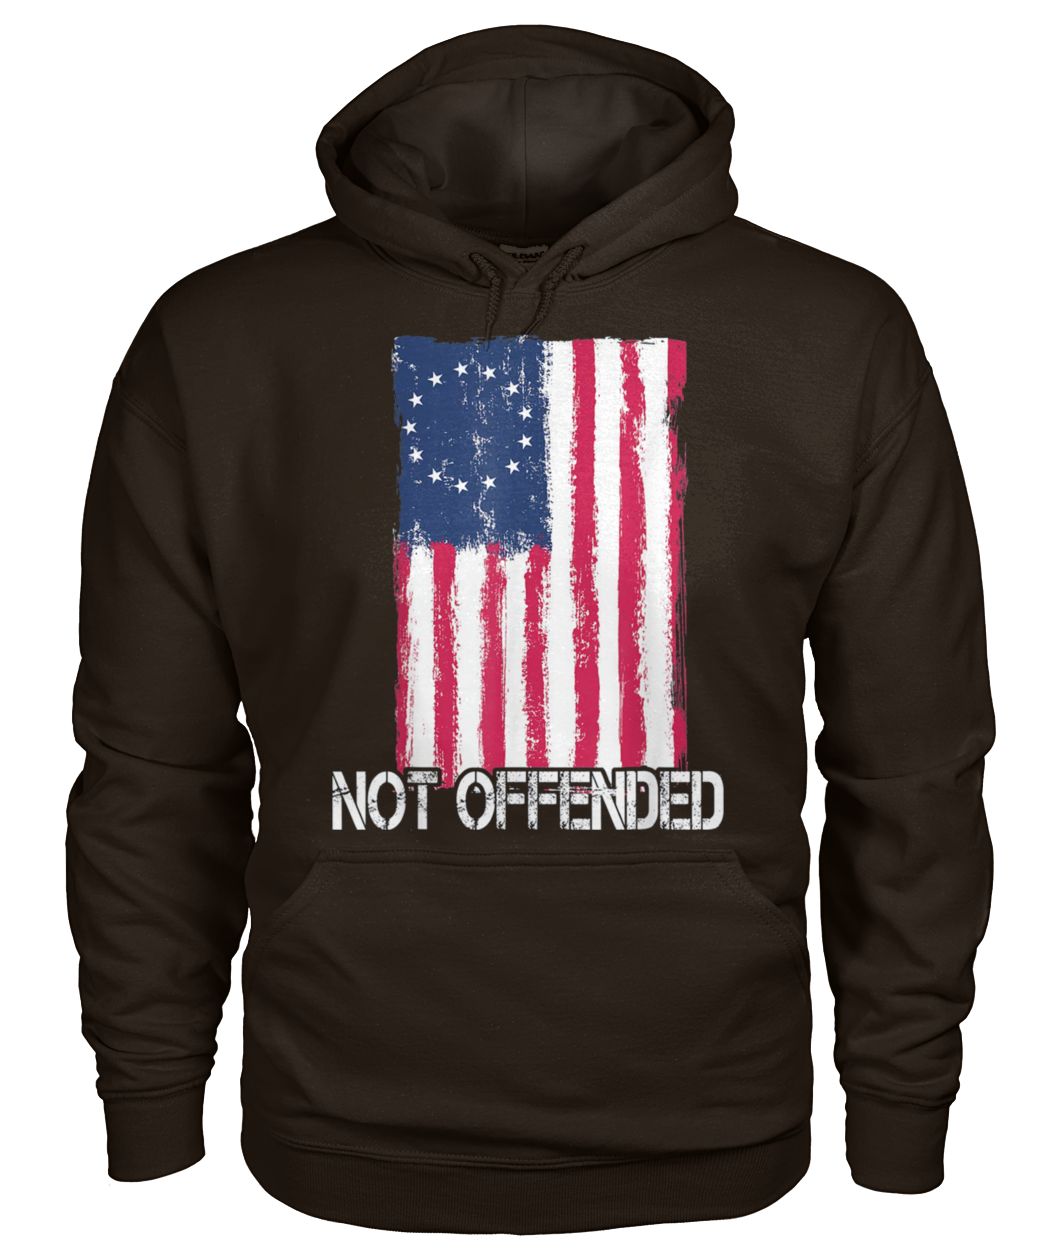 Not offended betsy ross american flag with 13 stars for protesters gildan hoodie